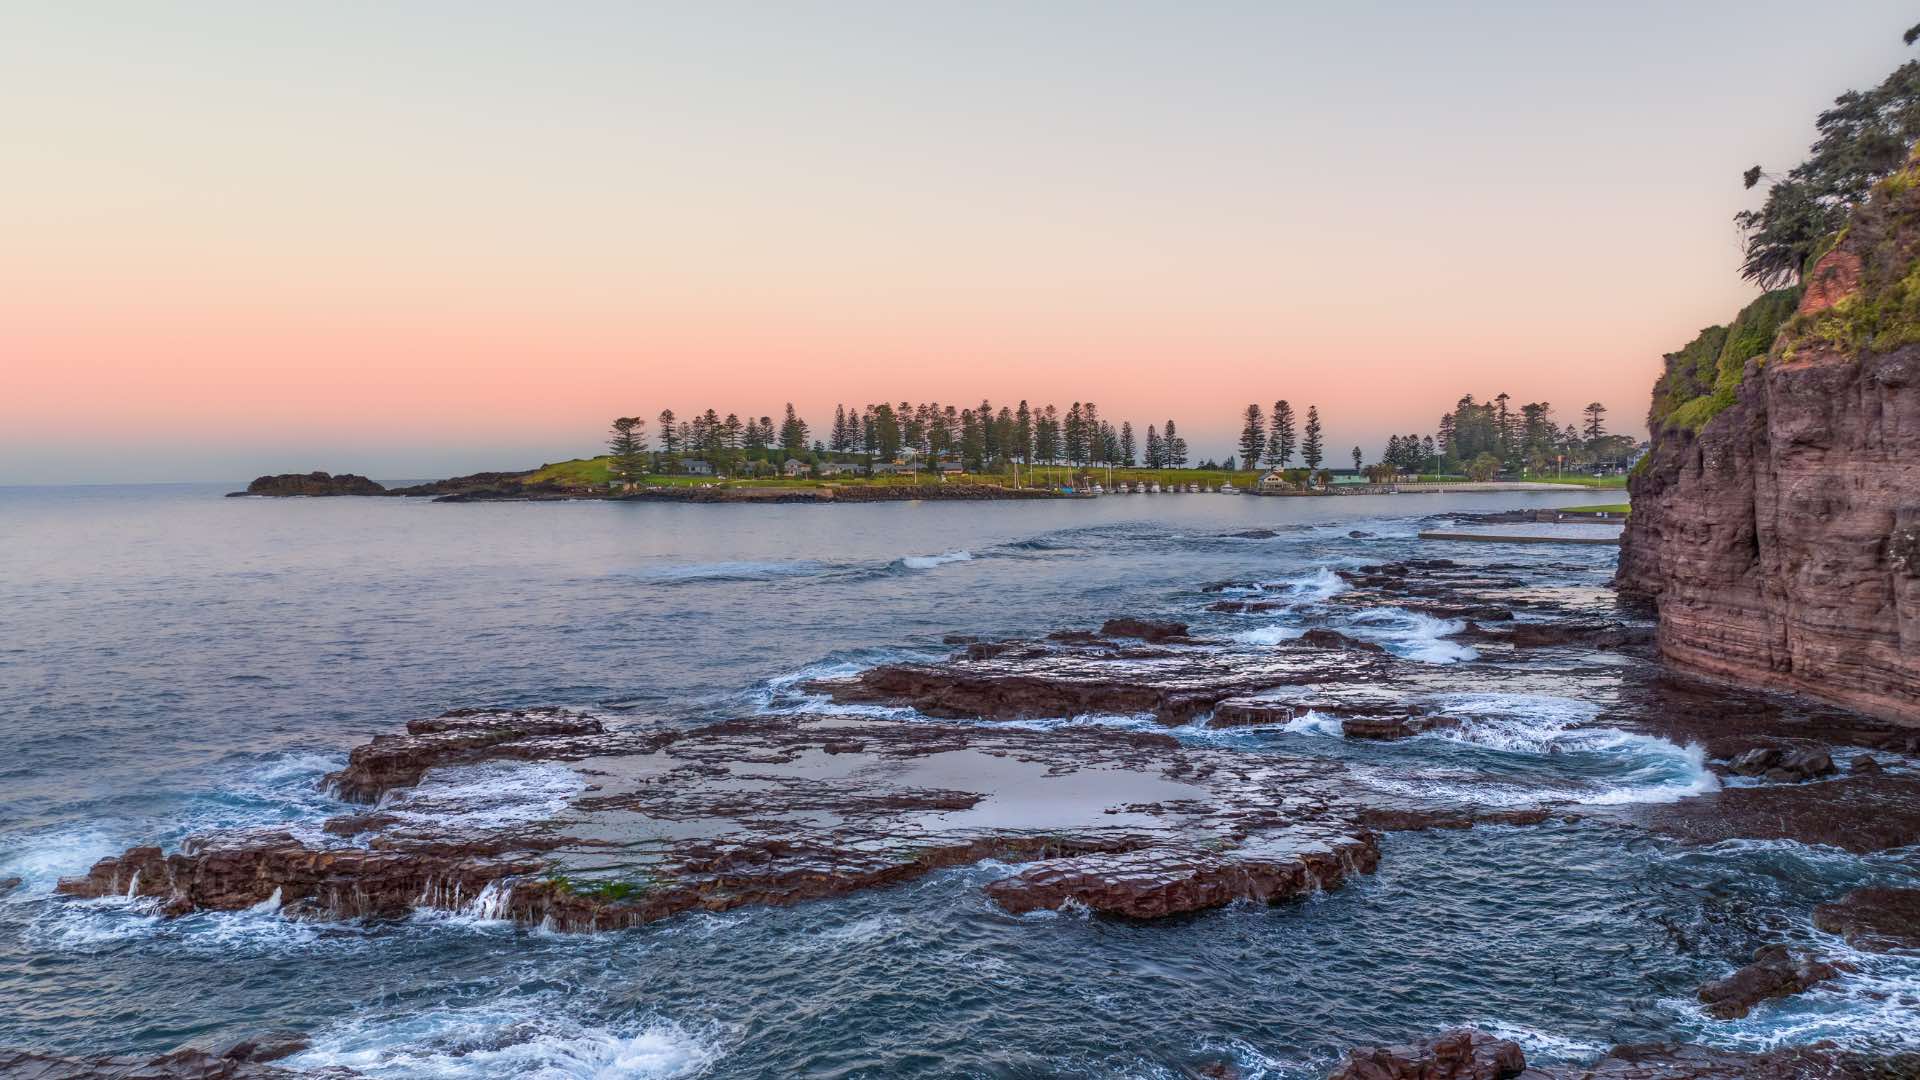 Beyond the Blowhole: Top Spots to Eat, Stay and Play in and Around Kiama for a Wonderful Winter Long Weekend